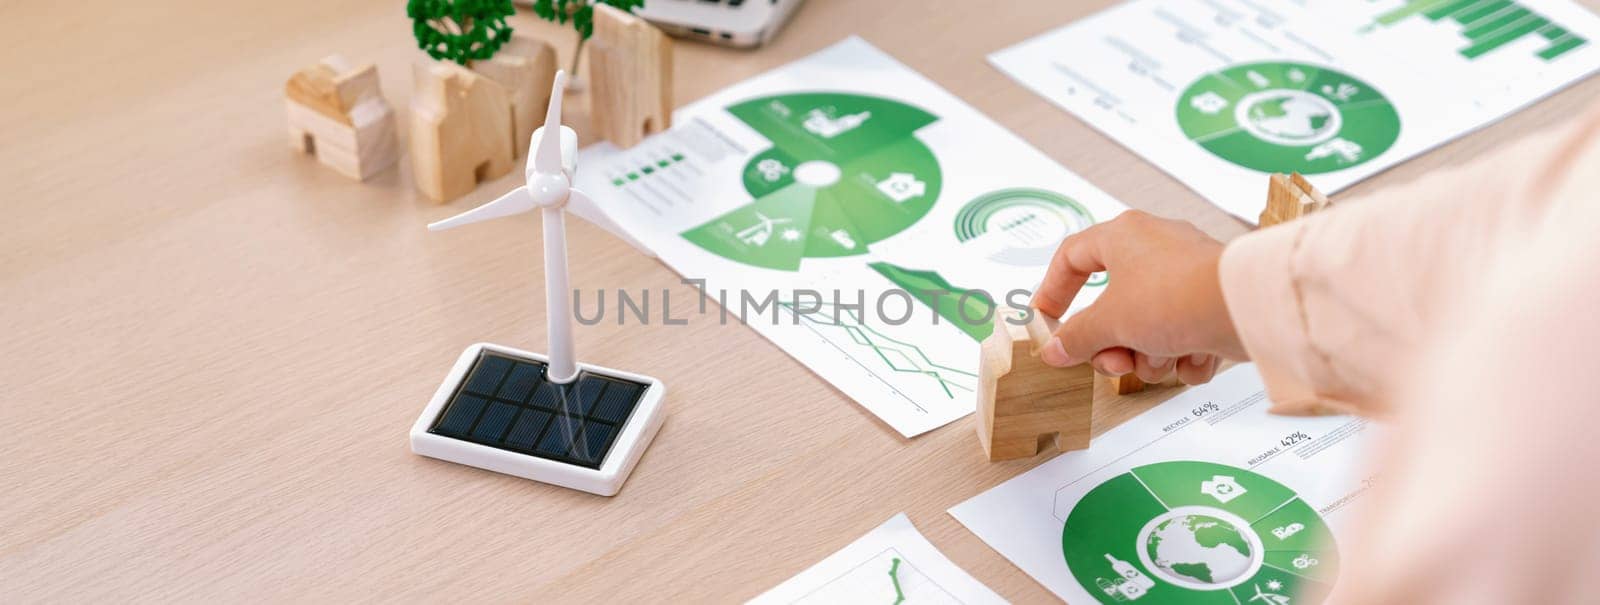 Environmental documents and a windmill model representing the use of clean energy are scattered on the table during a green business discussion about investing in clean energy. Closeup. Delineation.